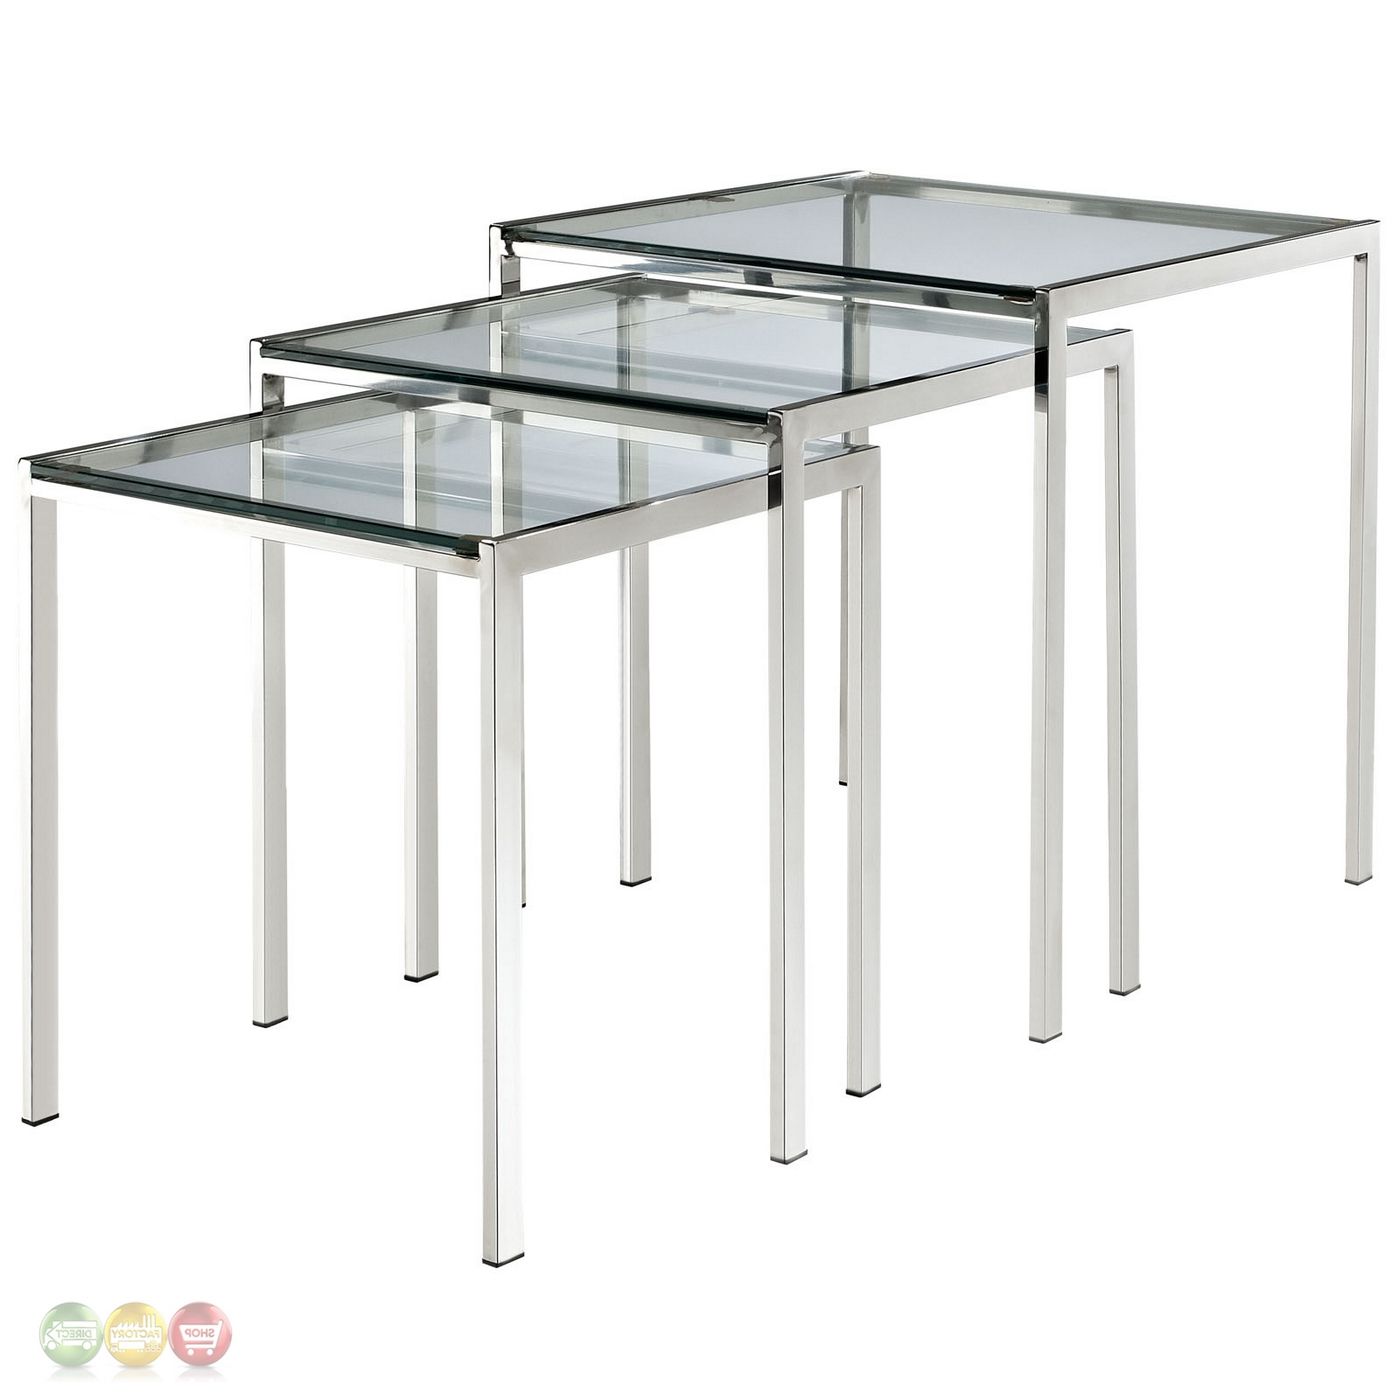 Nimble Modern Glass Top Nesting Table W/stainless Steel With Regard To Recent Glass And Stainless Steel Cocktail Tables (Gallery 19 of 20)